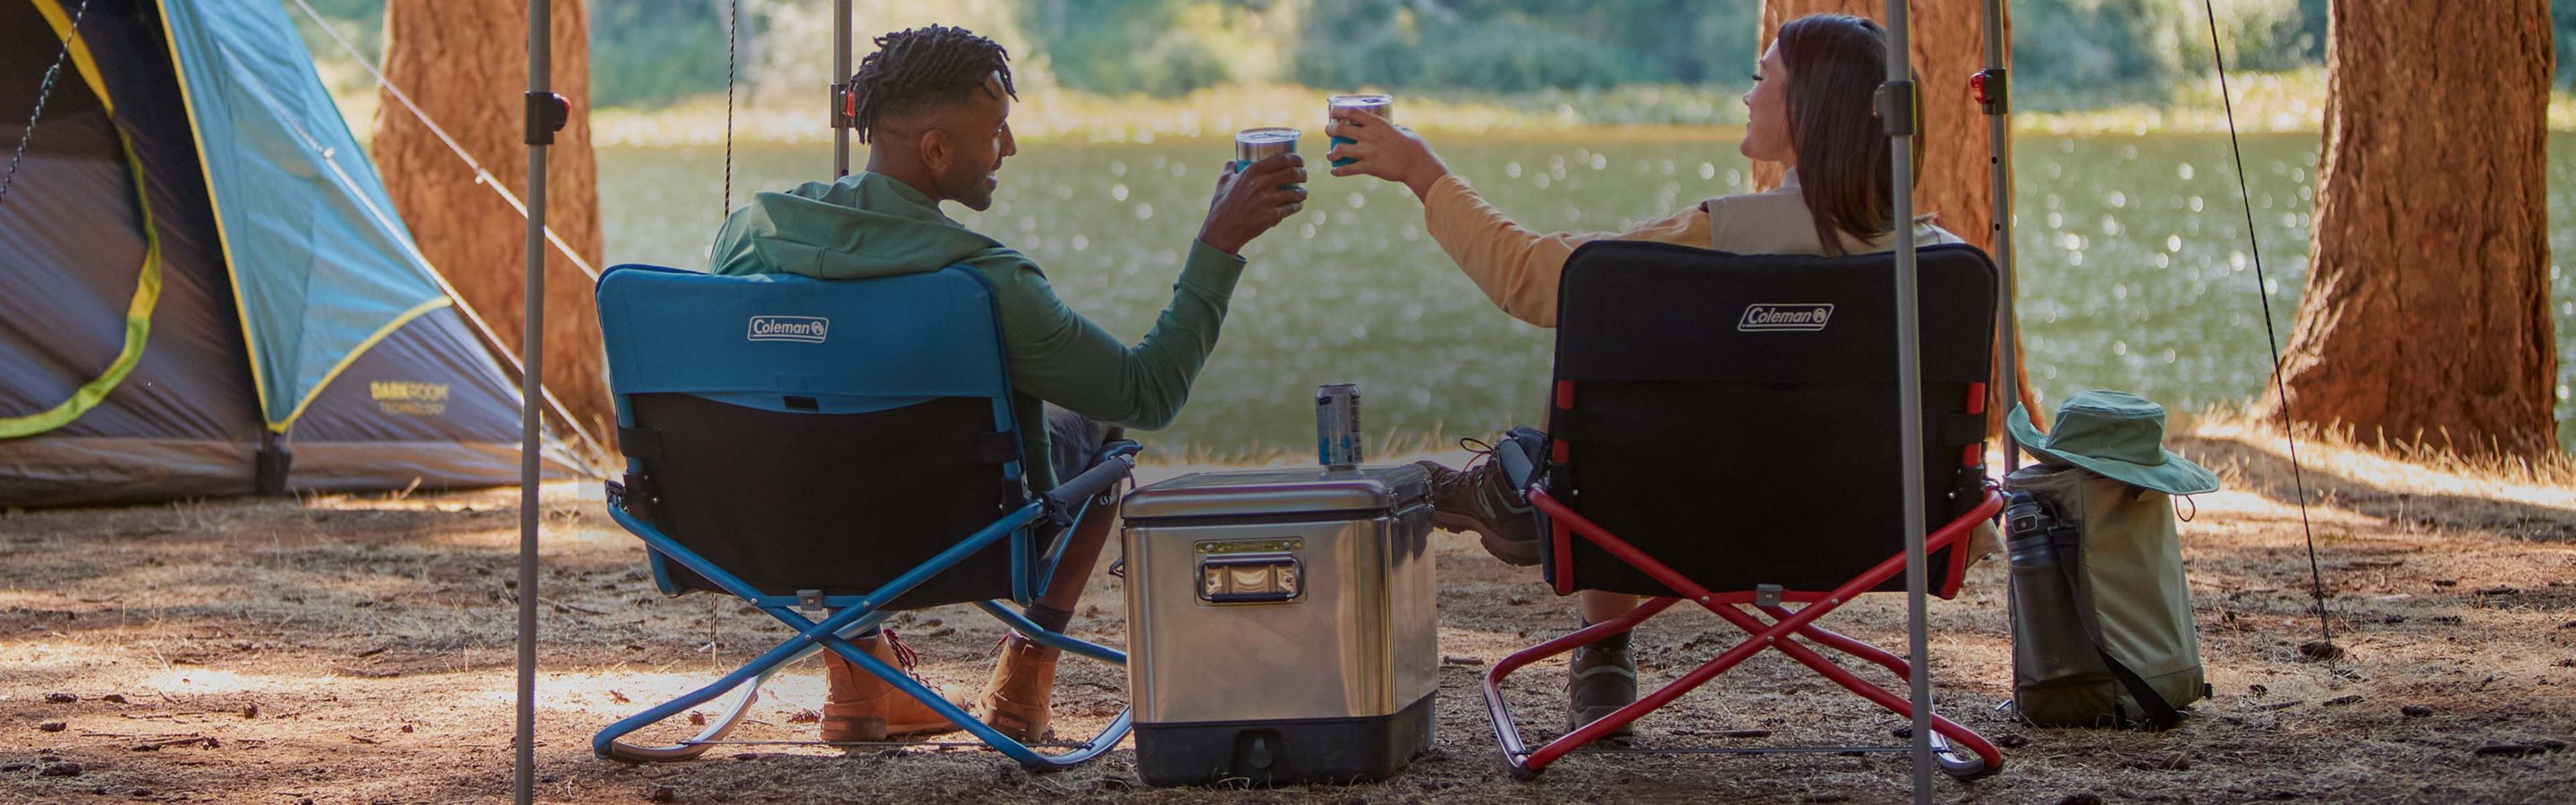 couple toasting at camp site